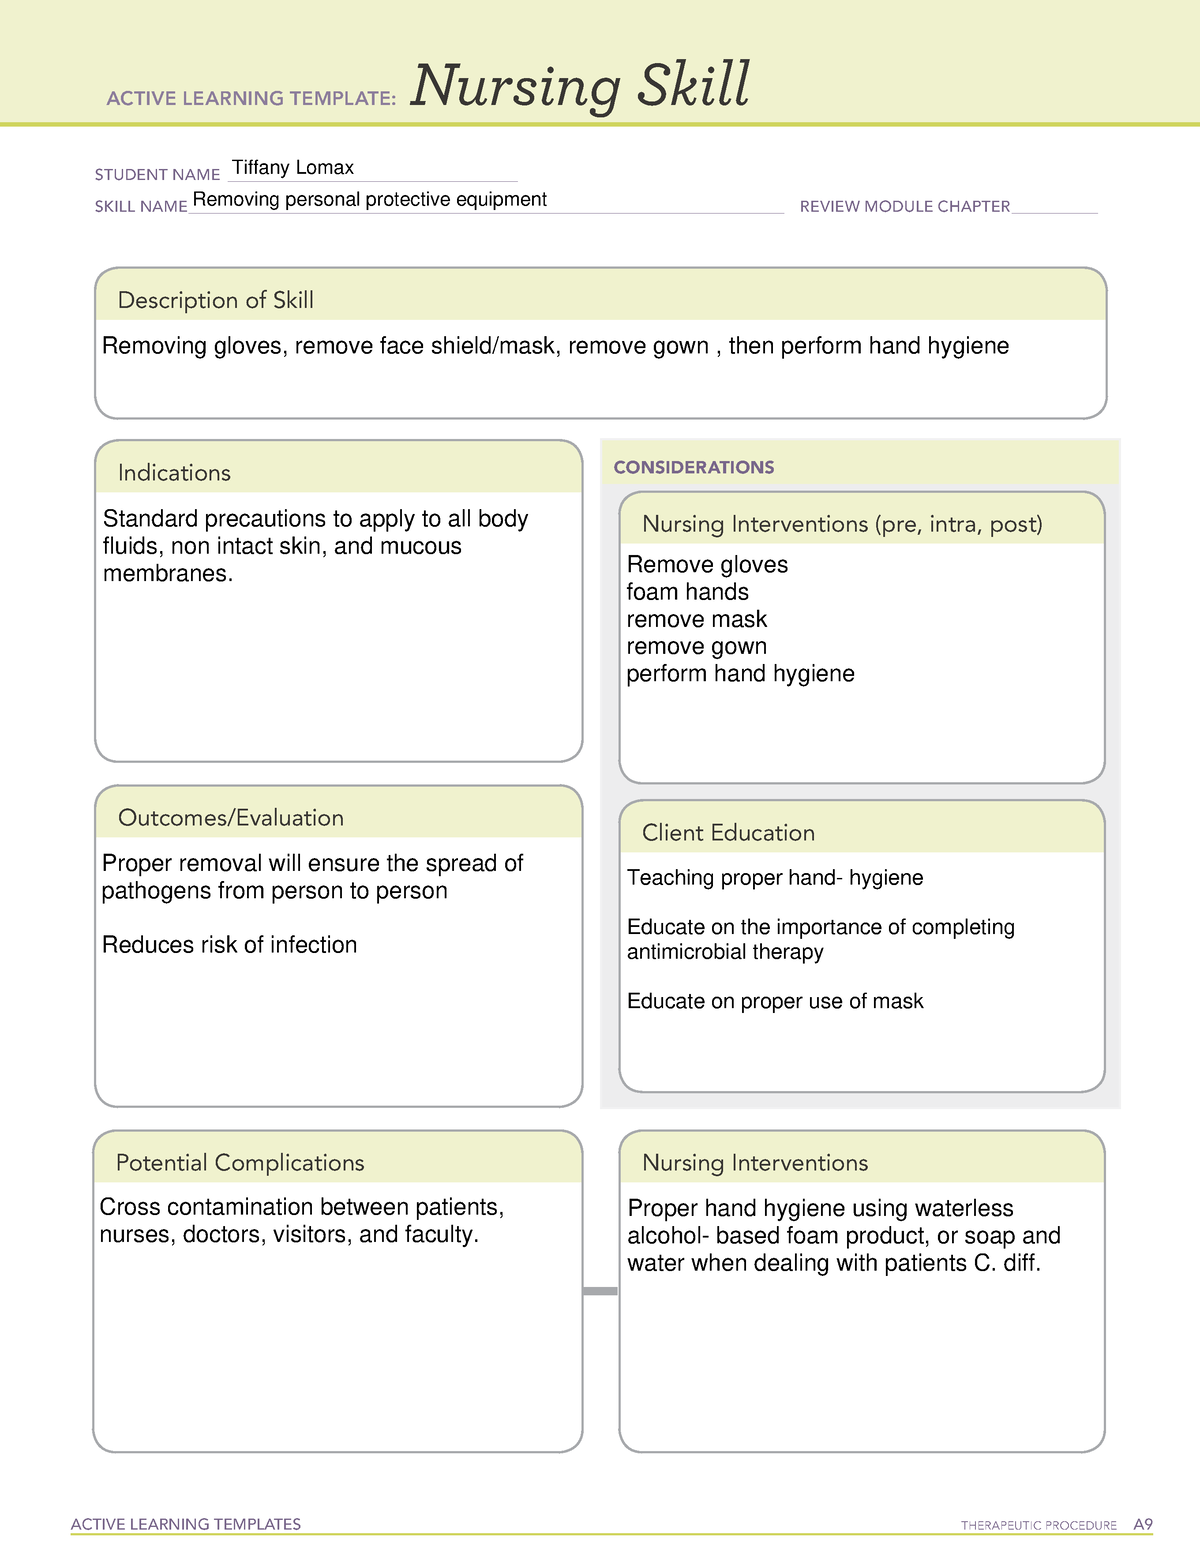 ATI active learning template - ACTIVE LEARNING TEMPLATES THERAPEUTIC ...